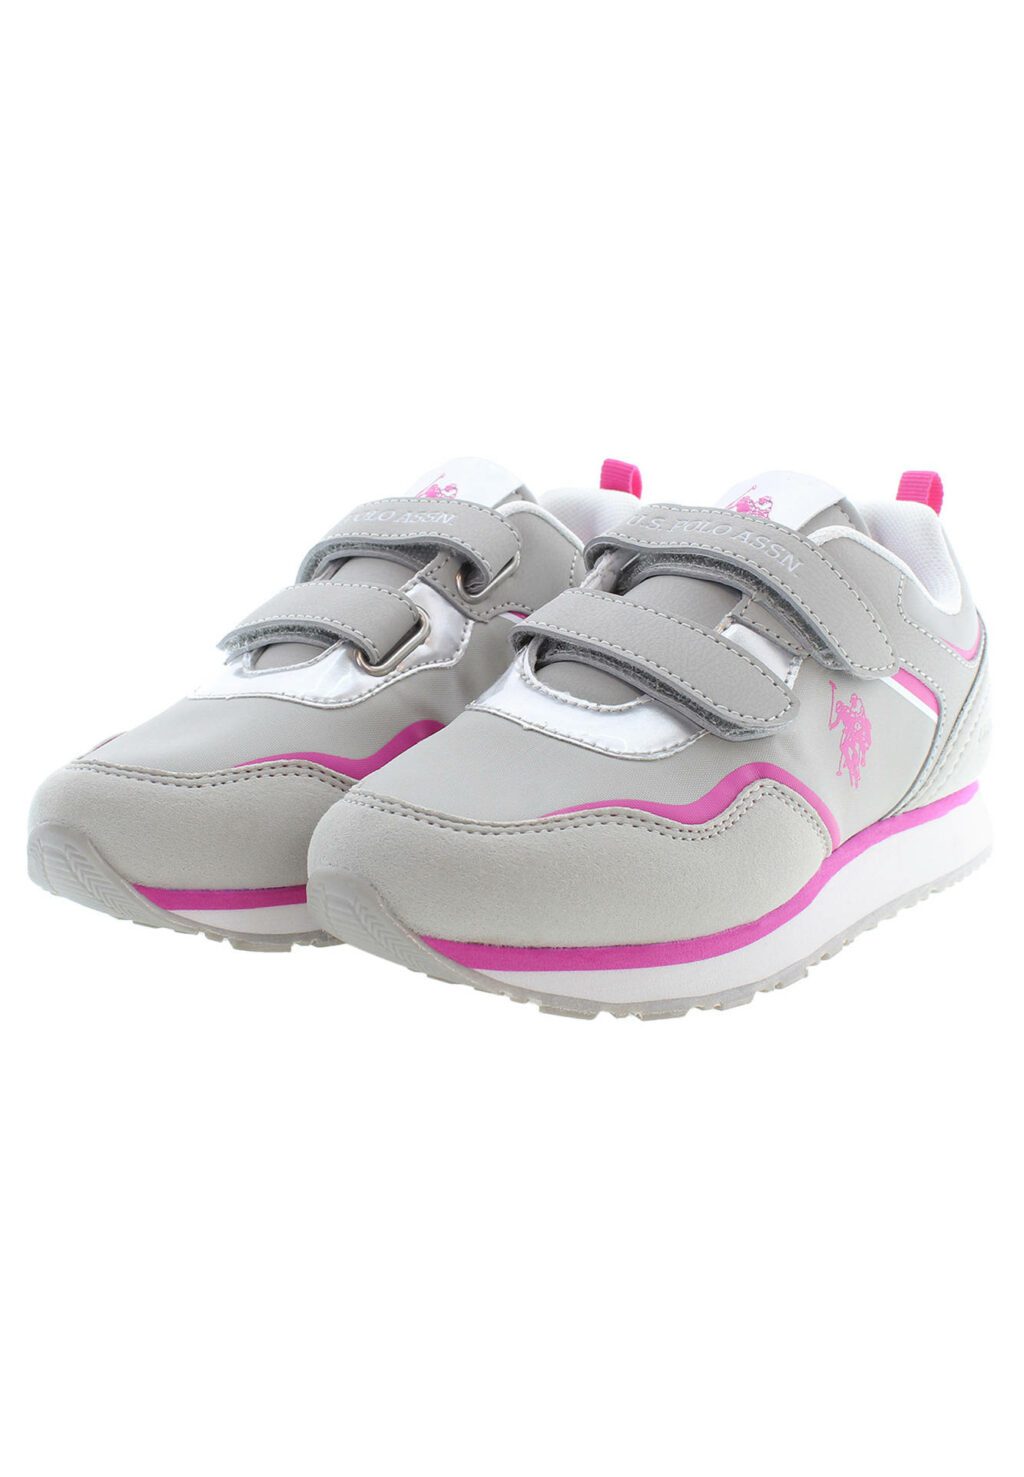 US POLO BEST PRICE GRAY GIRL SPORT SHOES NOBIK009K3NH1_GRIGIO_LGR-FUX01